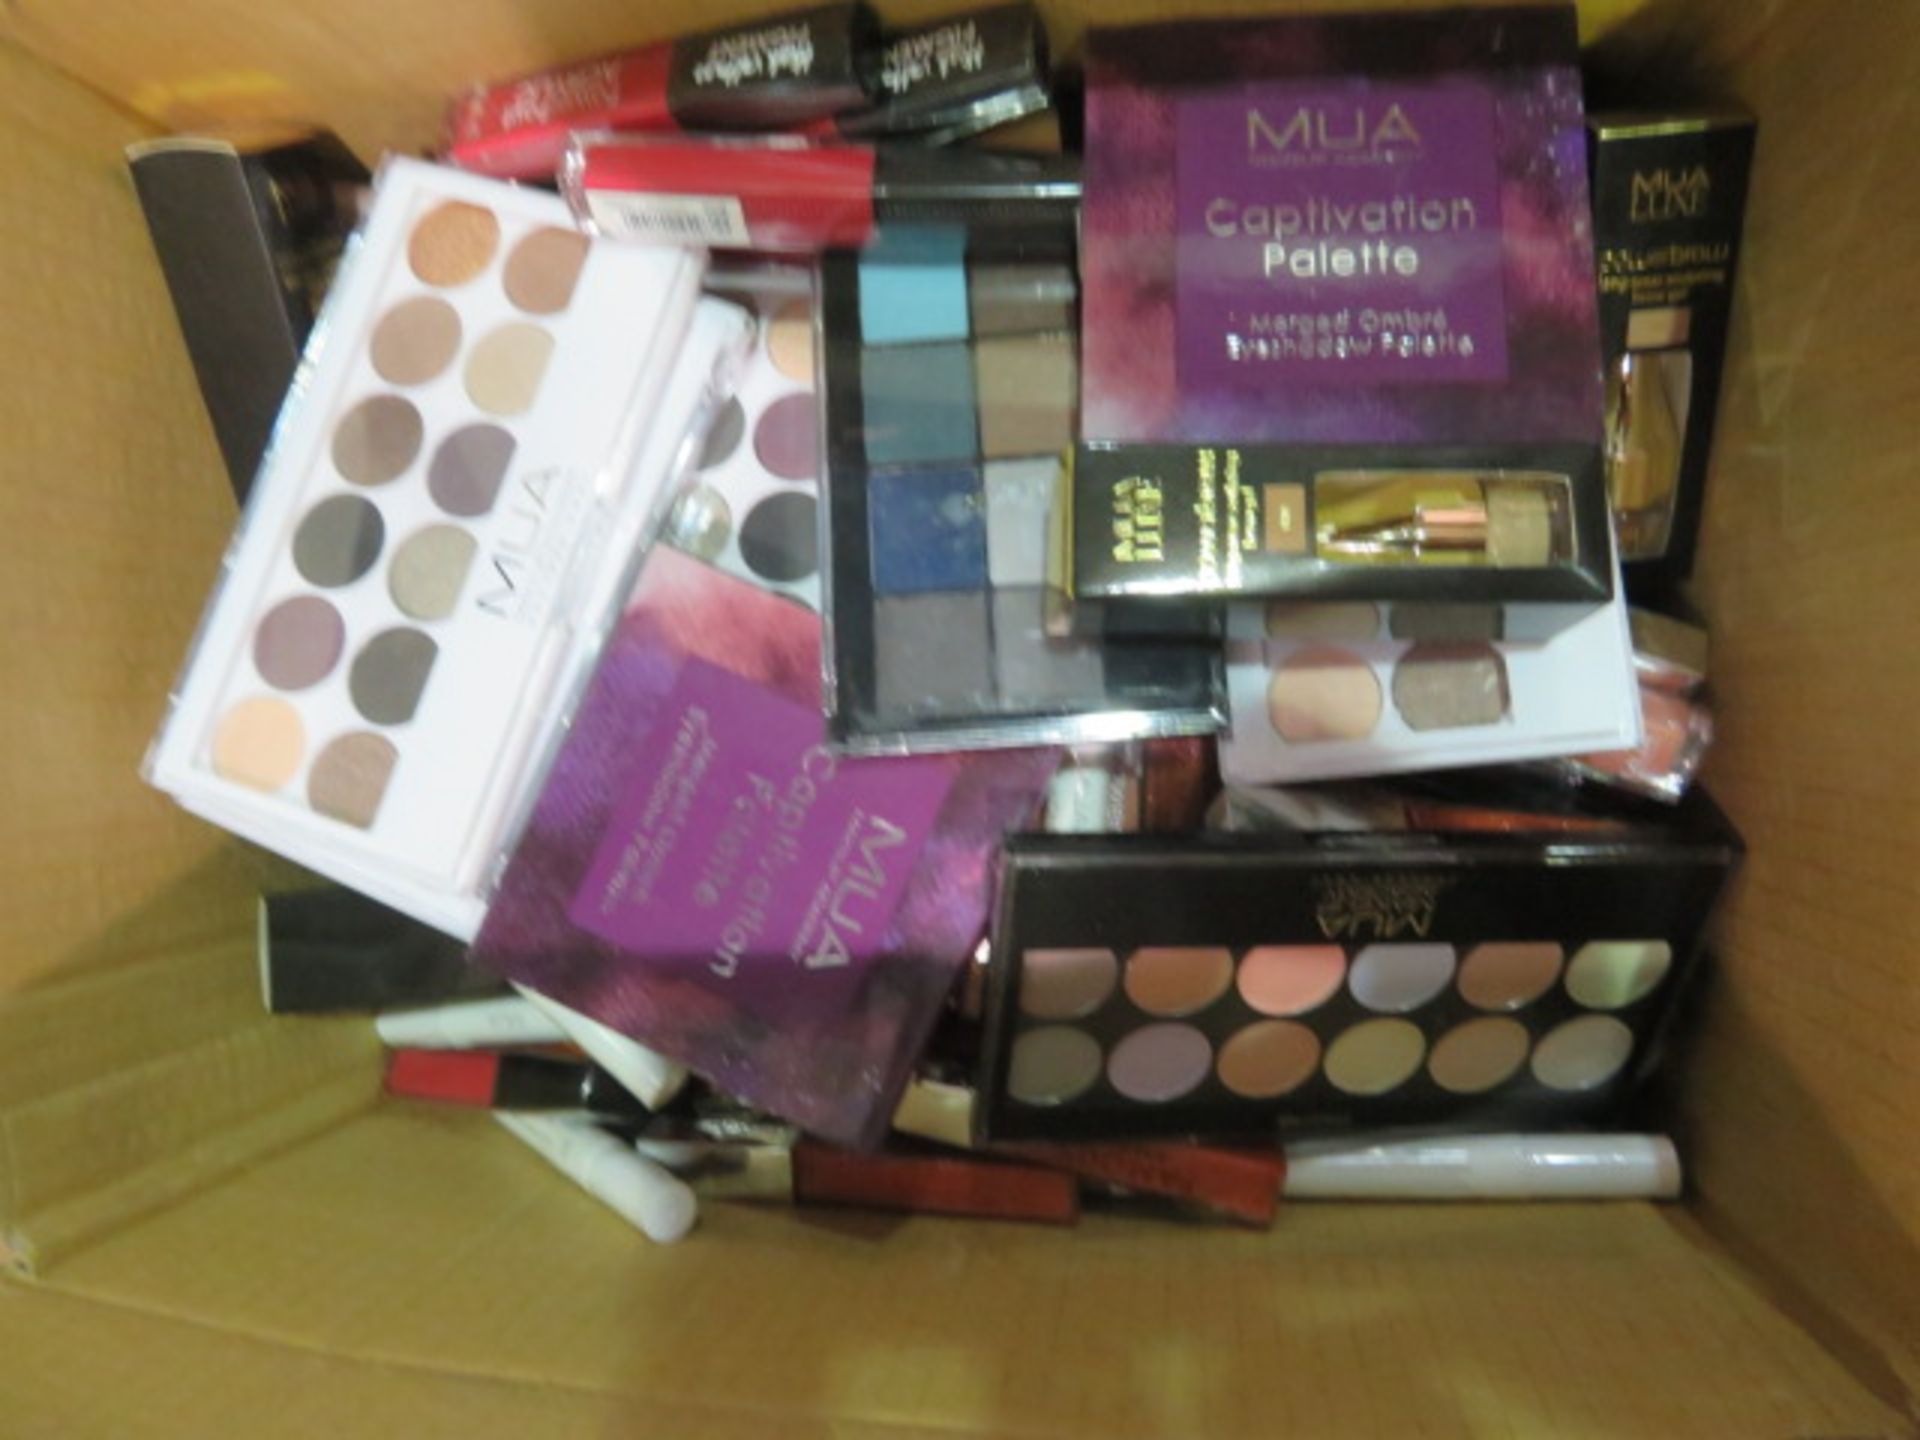 Circa. 200 items of various new make up acadamy make up to include: captivation palette, power ...